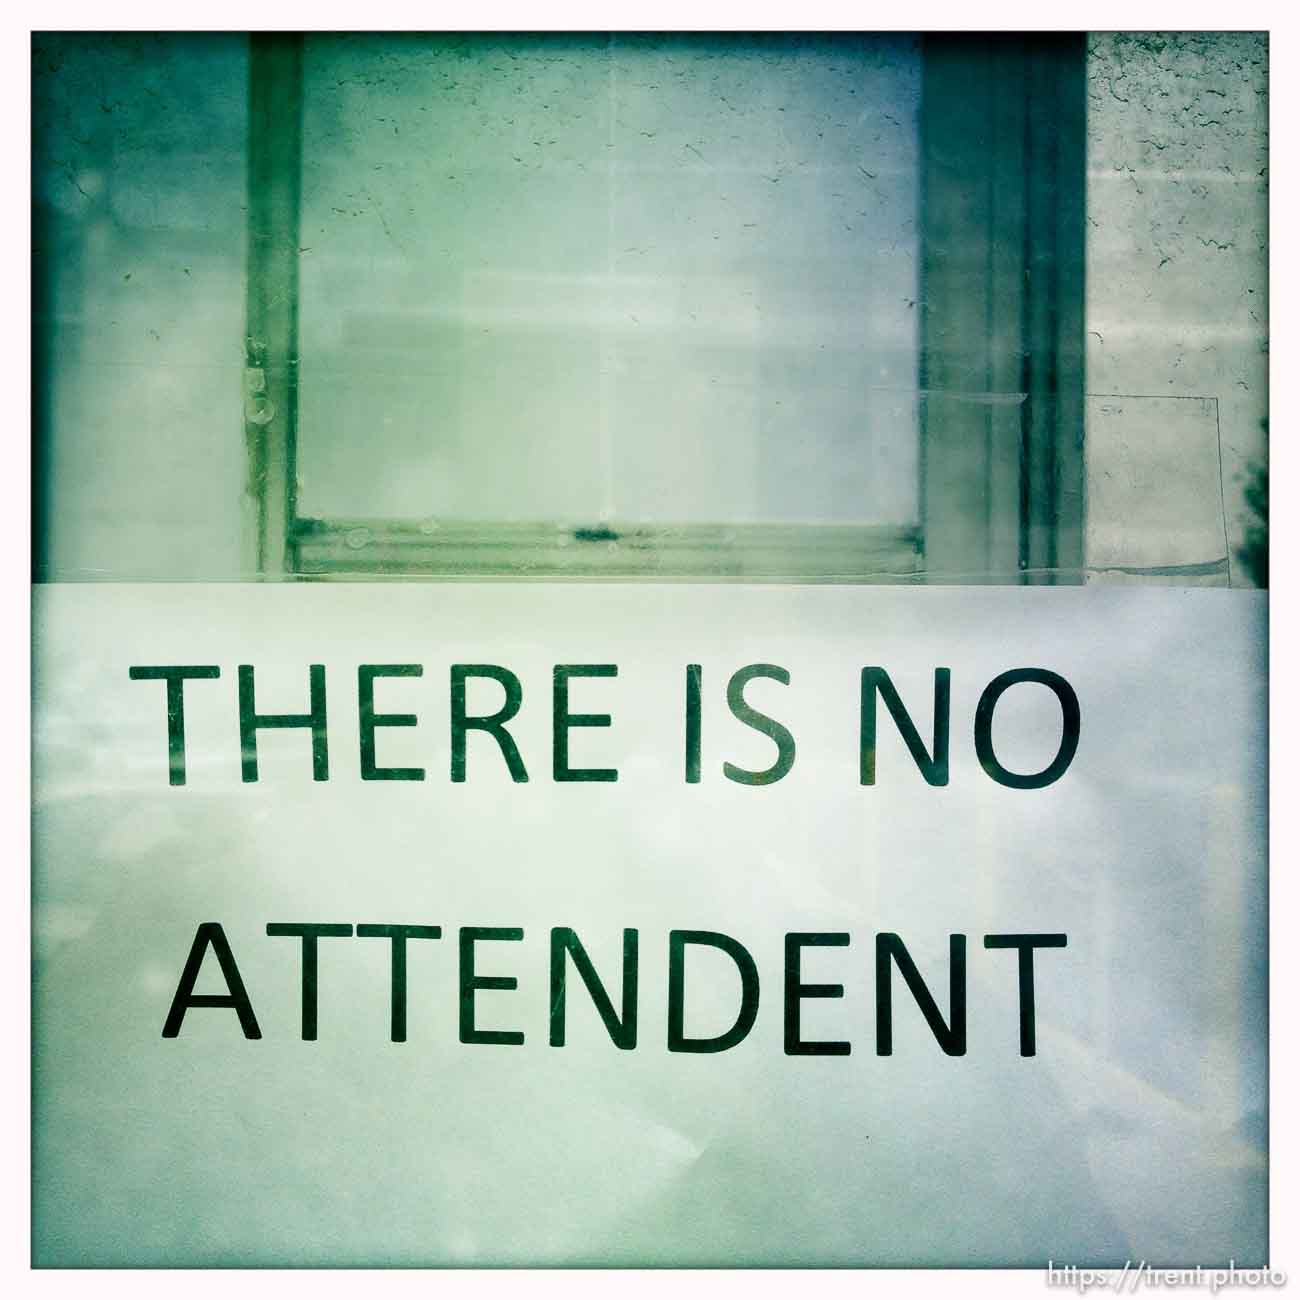 There is no Attendent